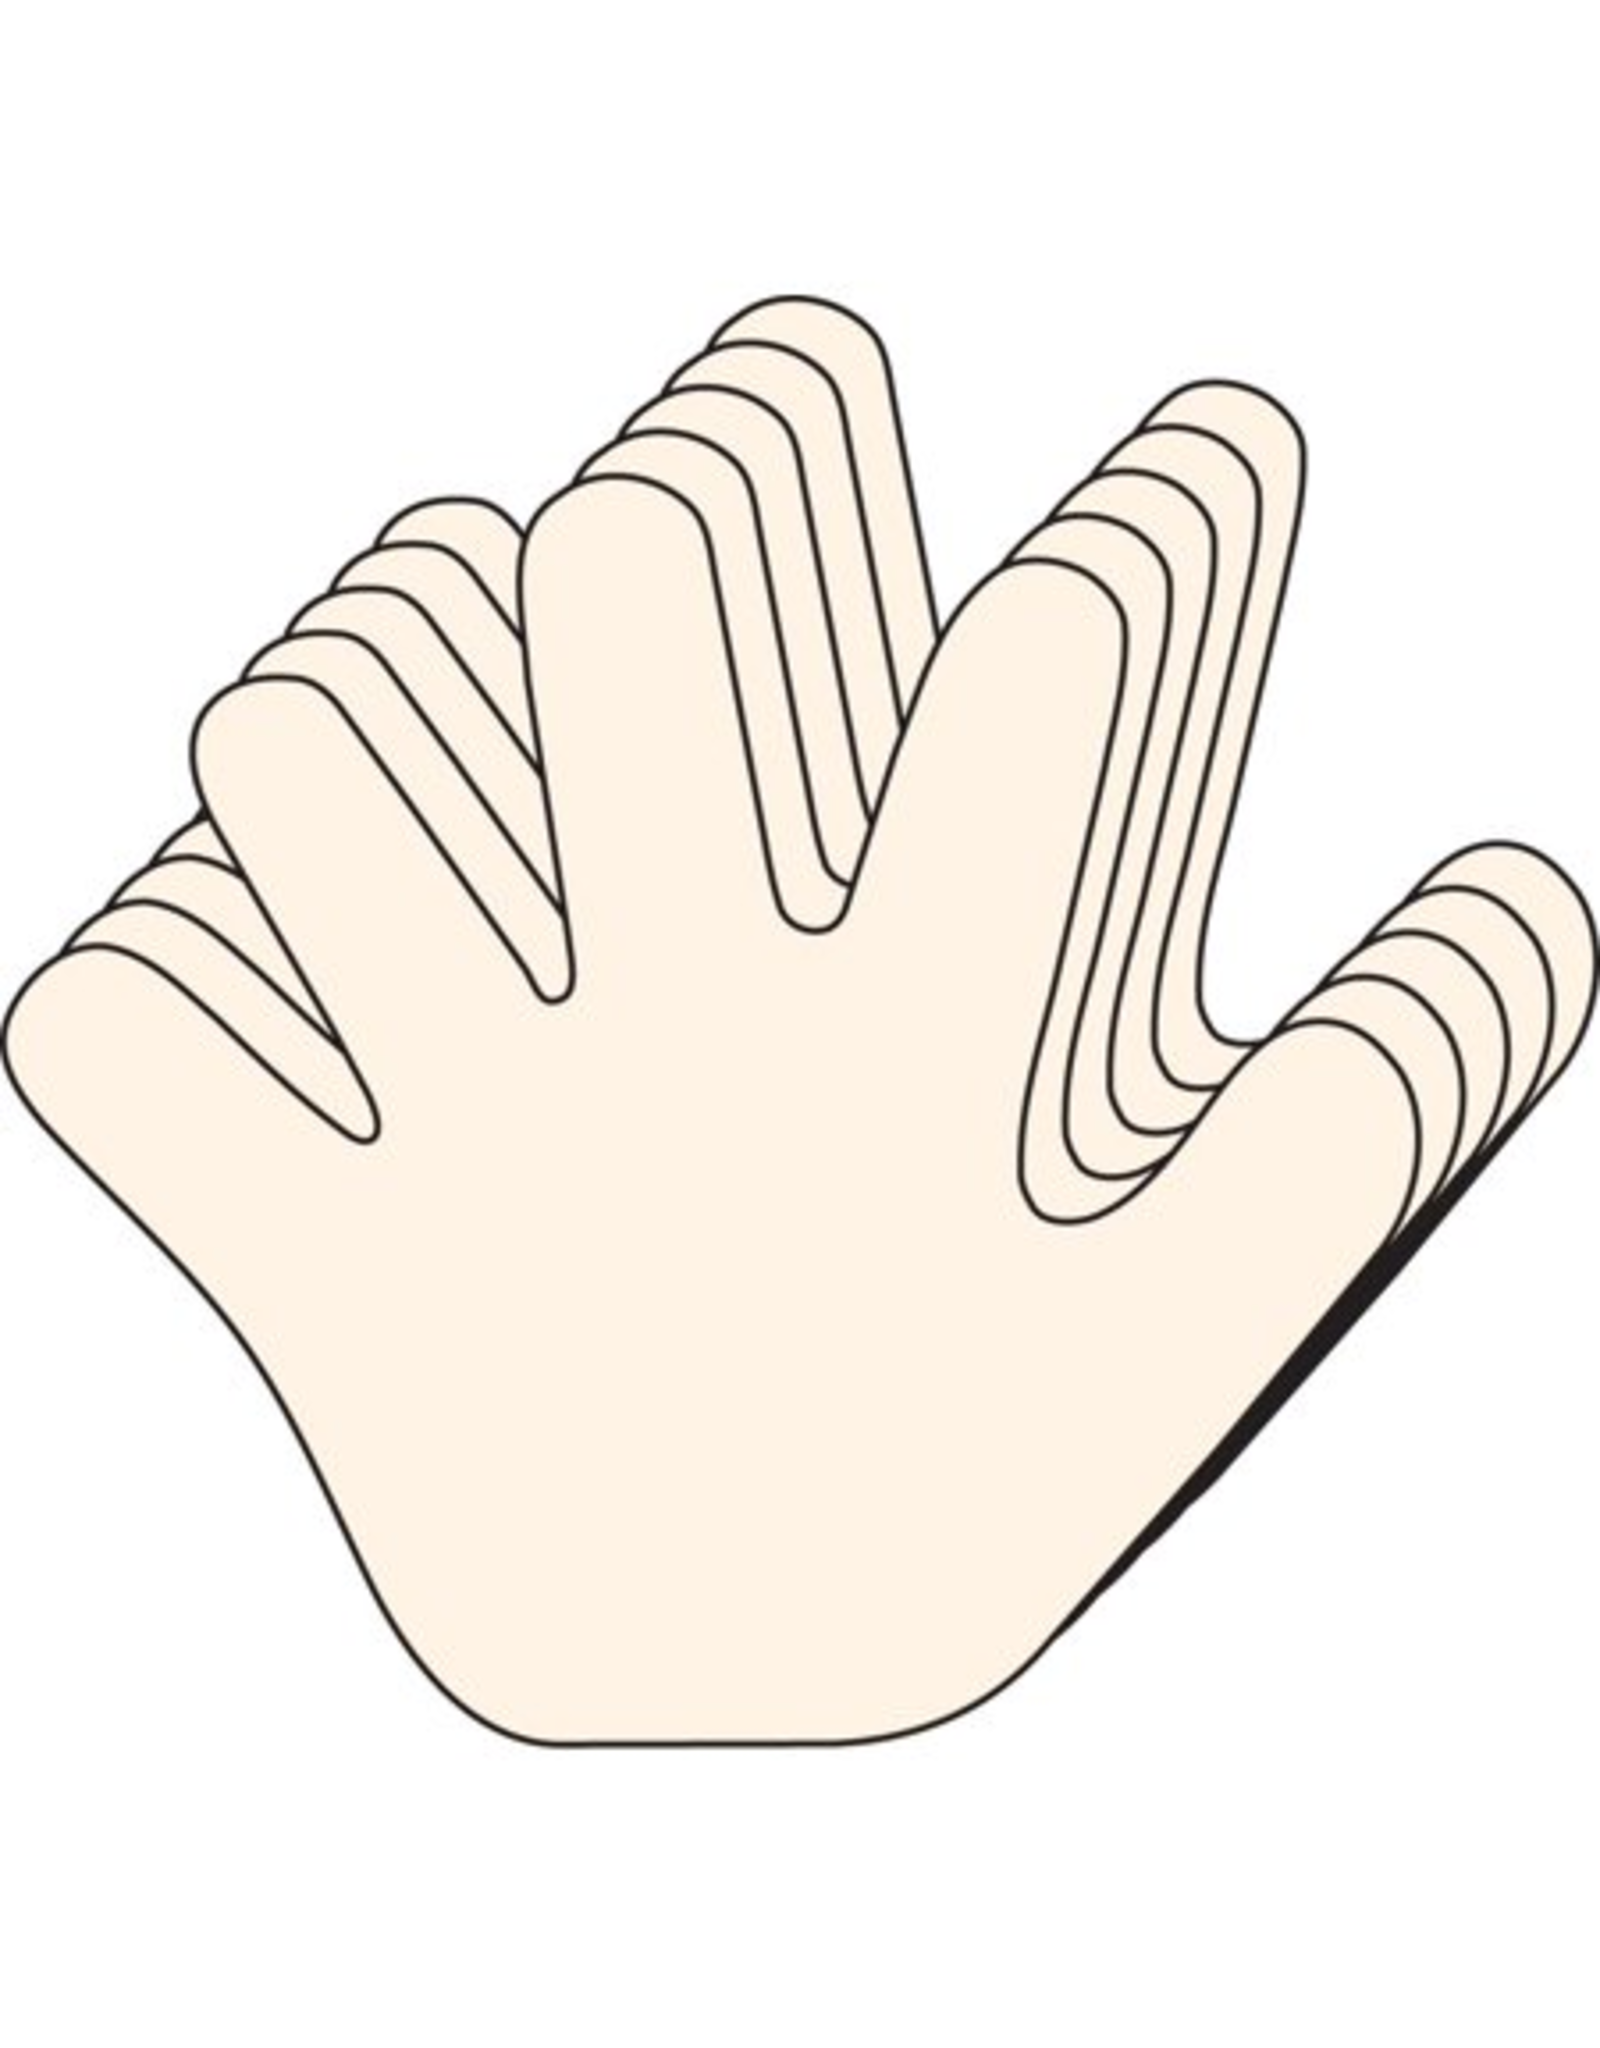 CUT-OUTS: LARGE HAND 5.5" 31 PACK